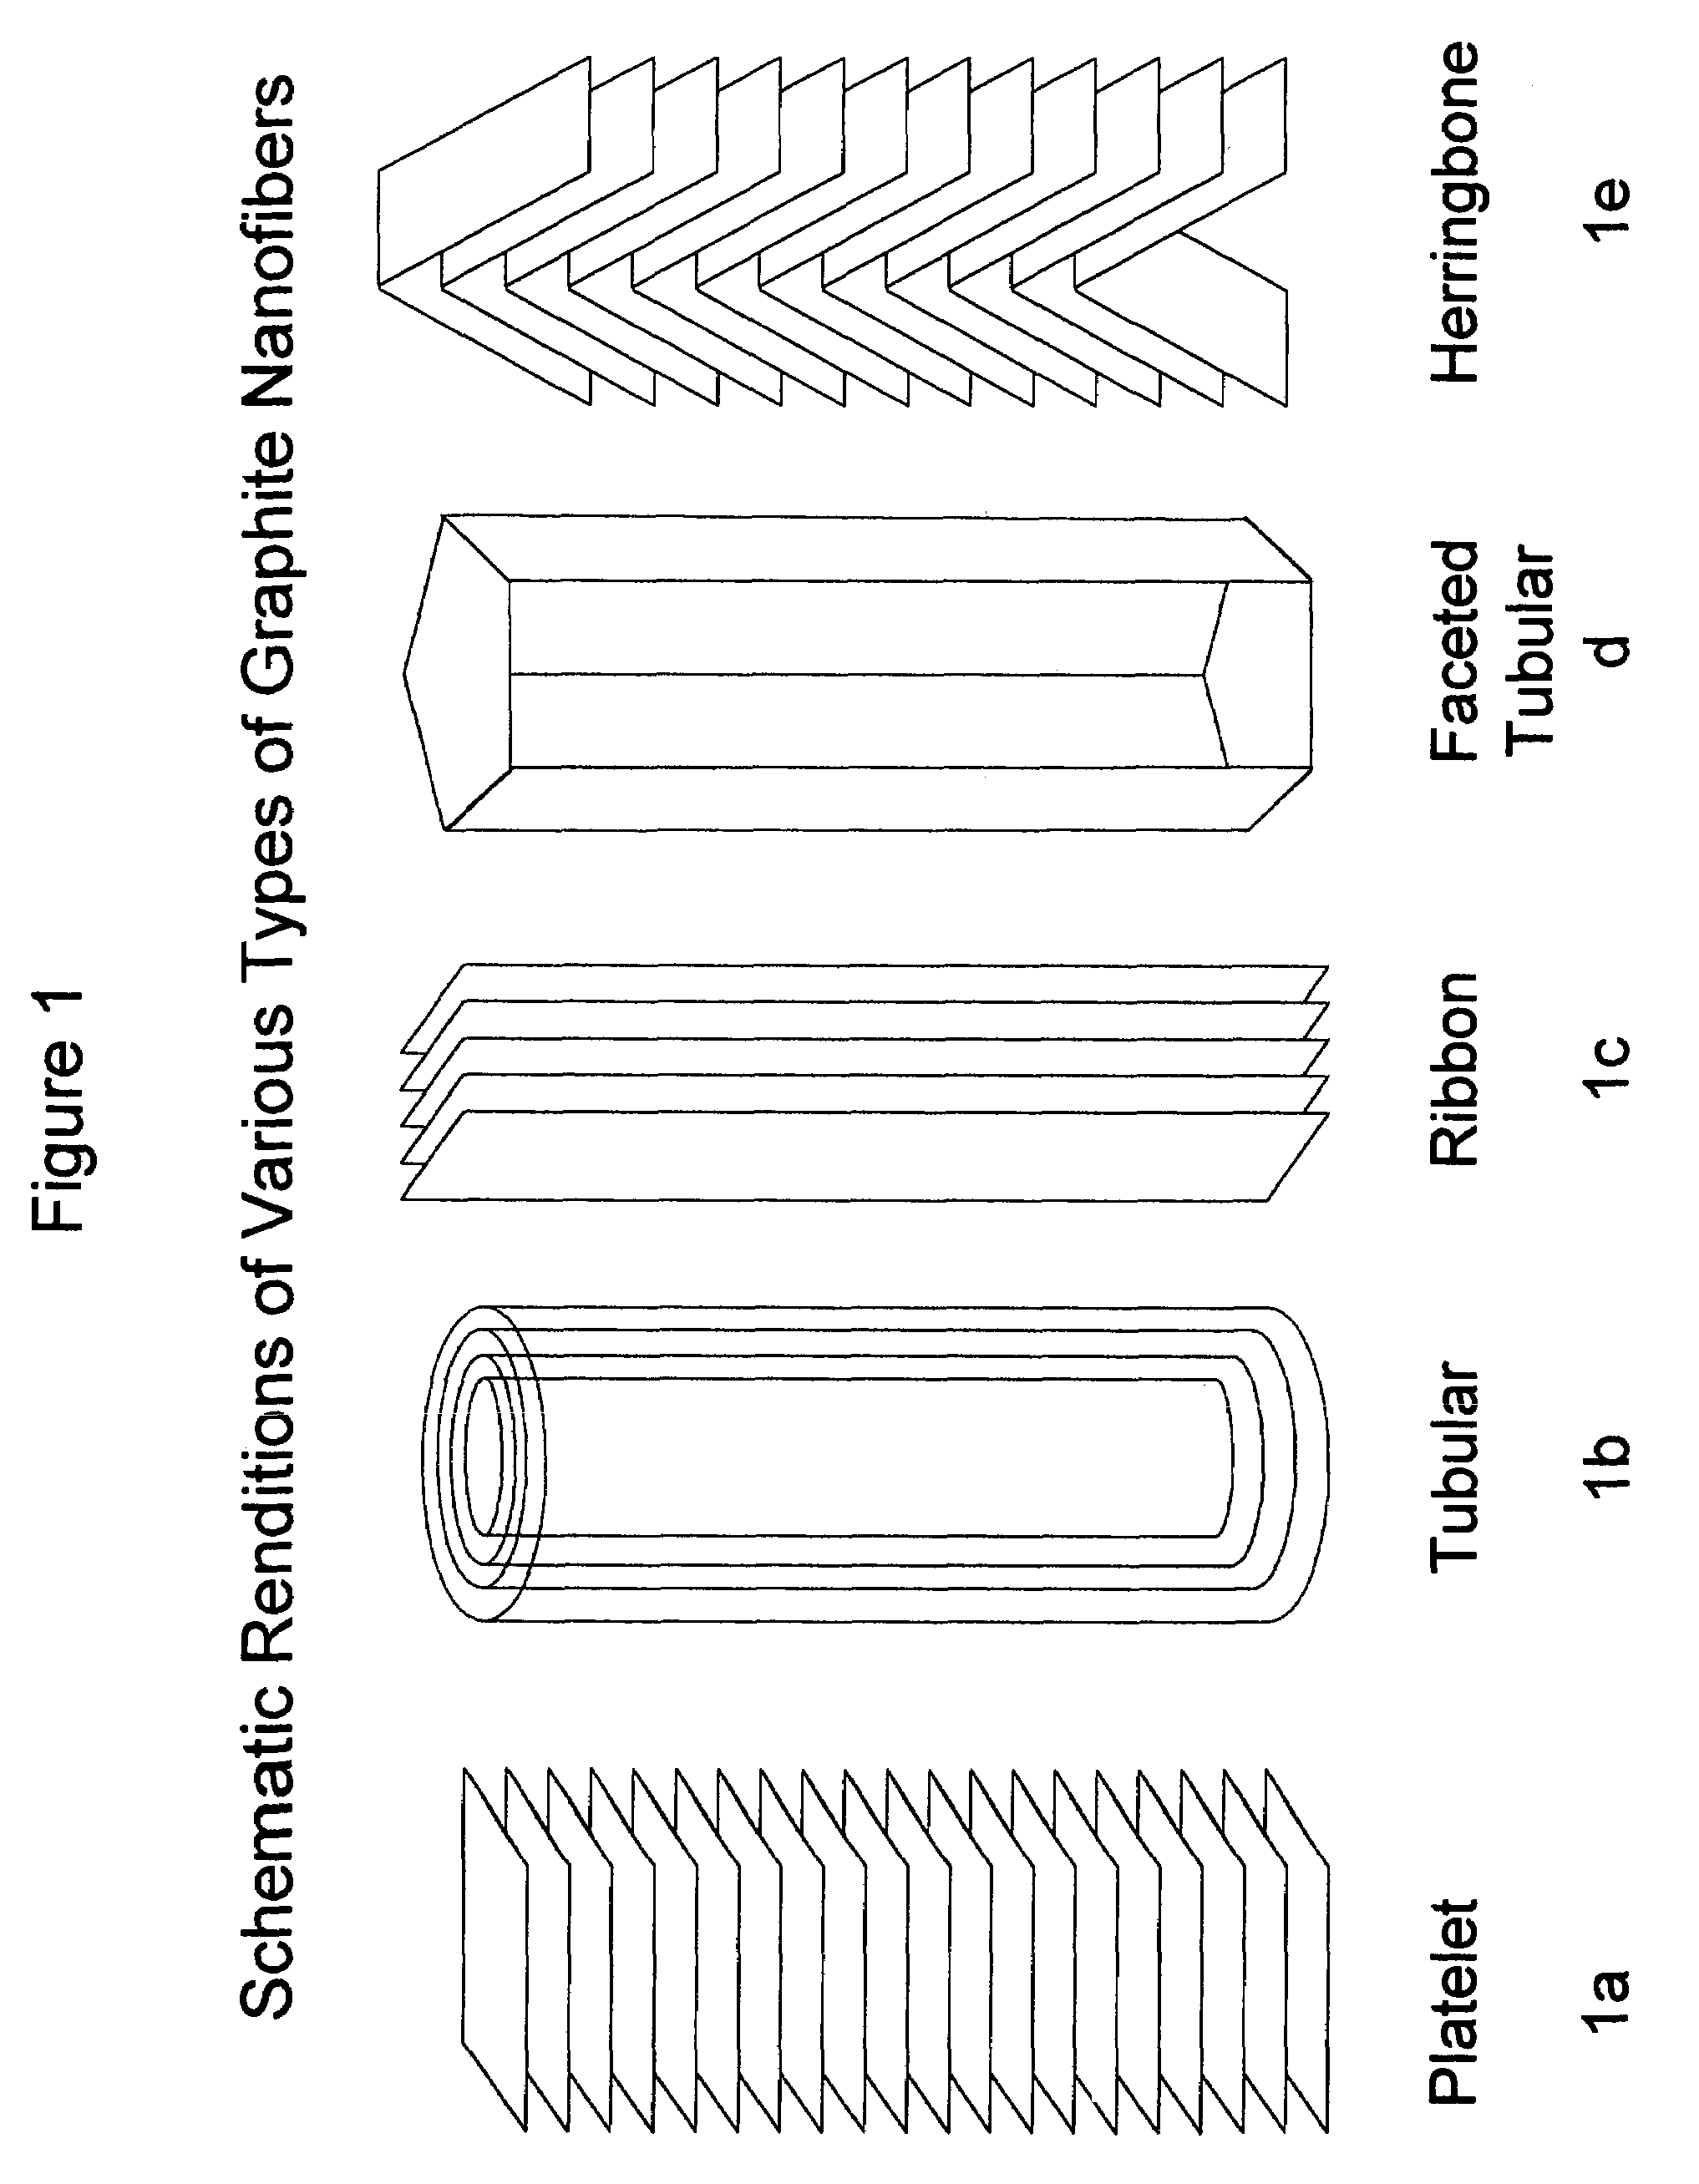 Multi-component conductive polymer structures and a method for producing same